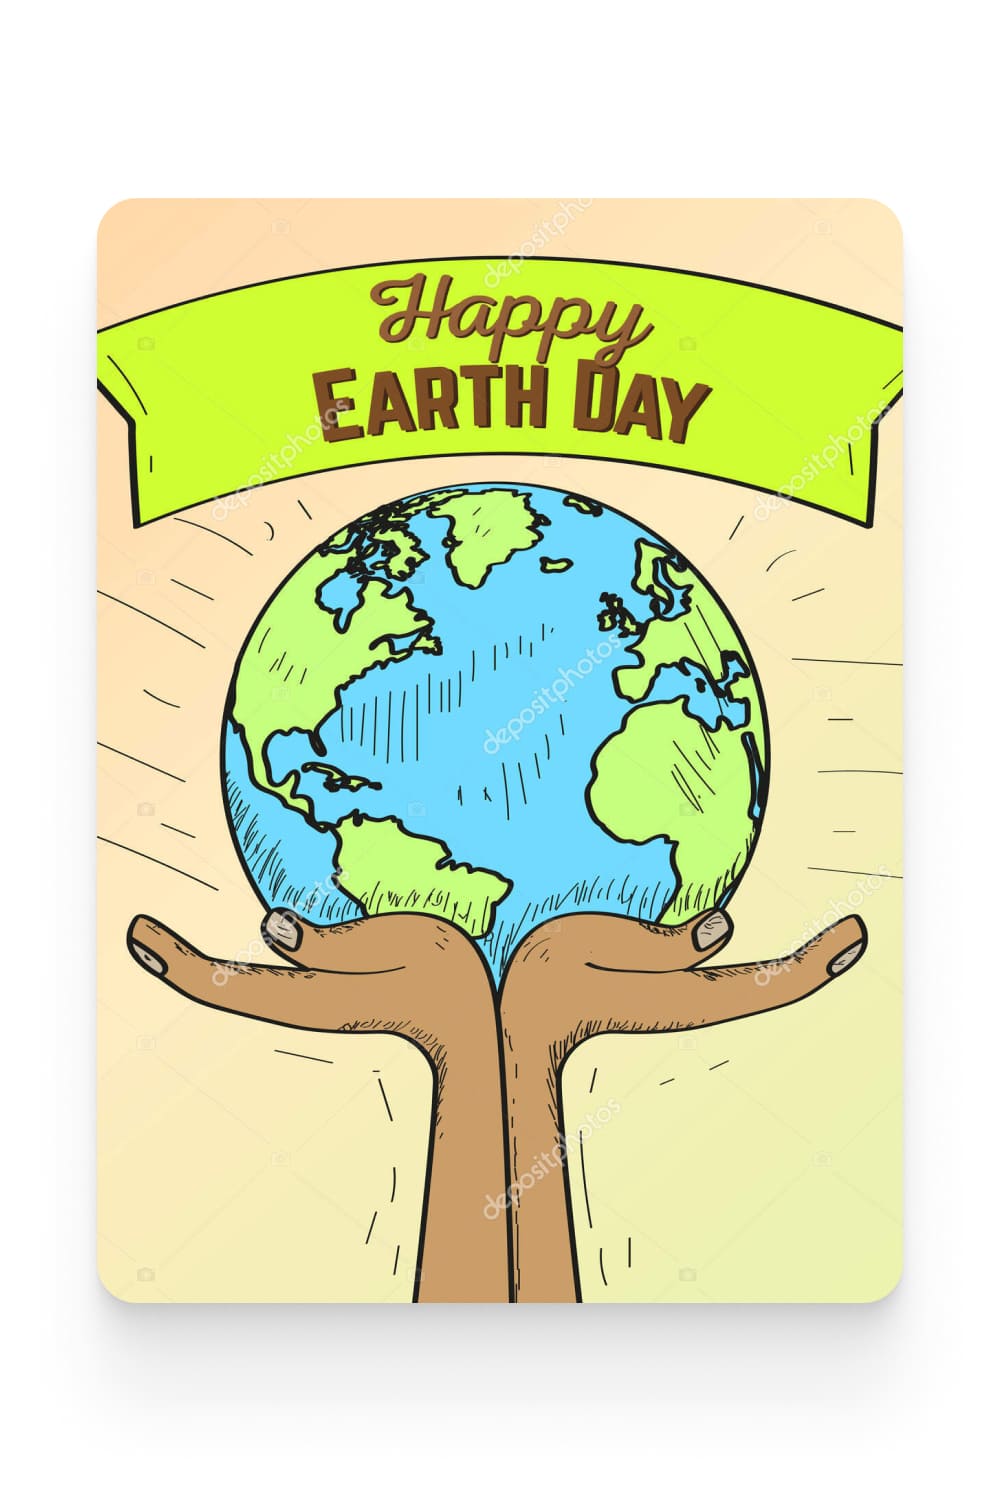 Dawn Happy earth day banner with hands and Earth.